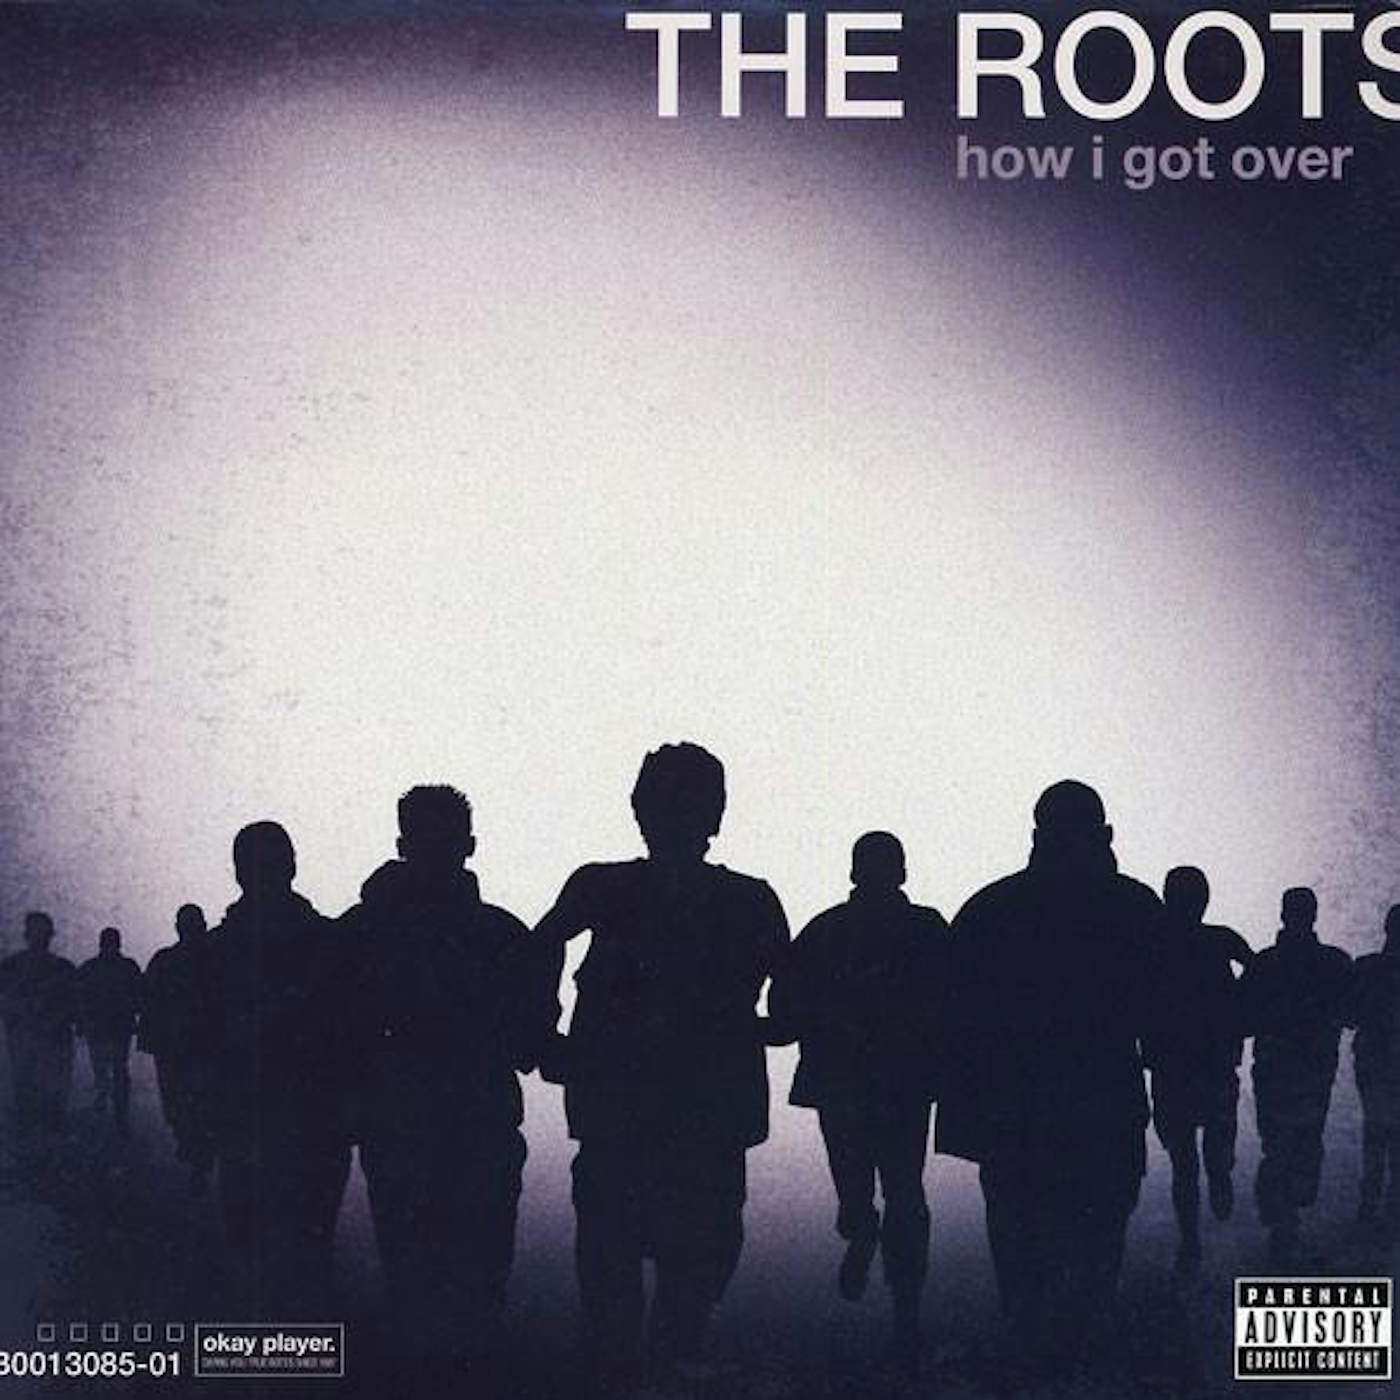 The Roots HOW I GOT OVER Vinyl Record